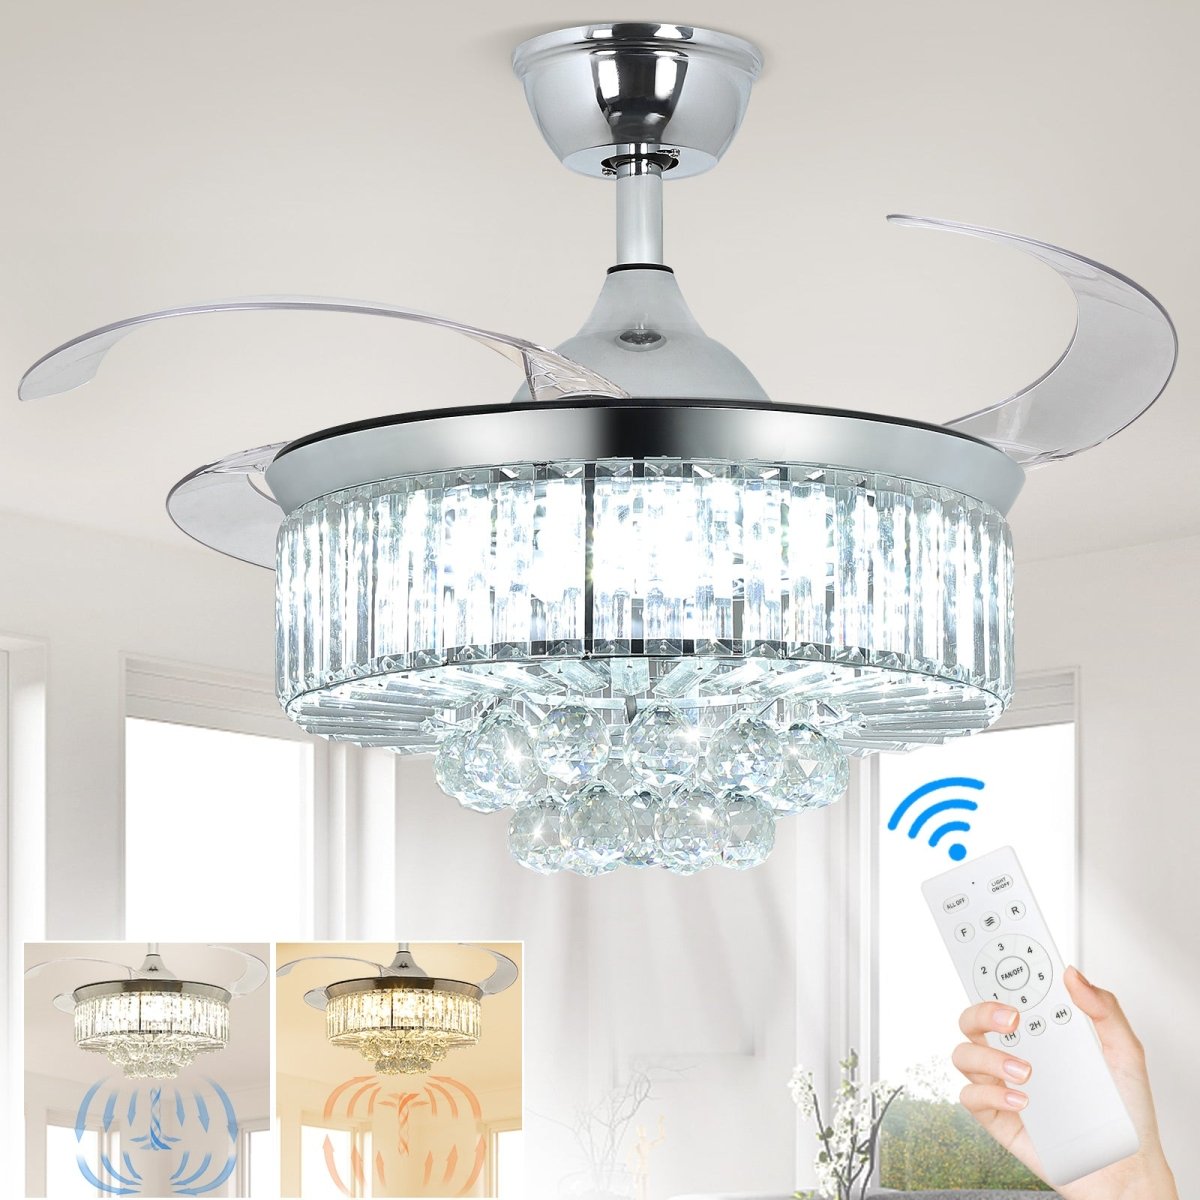 DLLT 42 In Modern Crystal Retractable Invisible Blades Fandelier, LED Chandelier Ceiling Fan with Lights and Remote for Bedroom, Living Room, 3 Color Changeable 3000K-6000K, Reversible DC Motor, 6 Speed, Silver - WS-FPZ39-36C 1 | DEPULEY